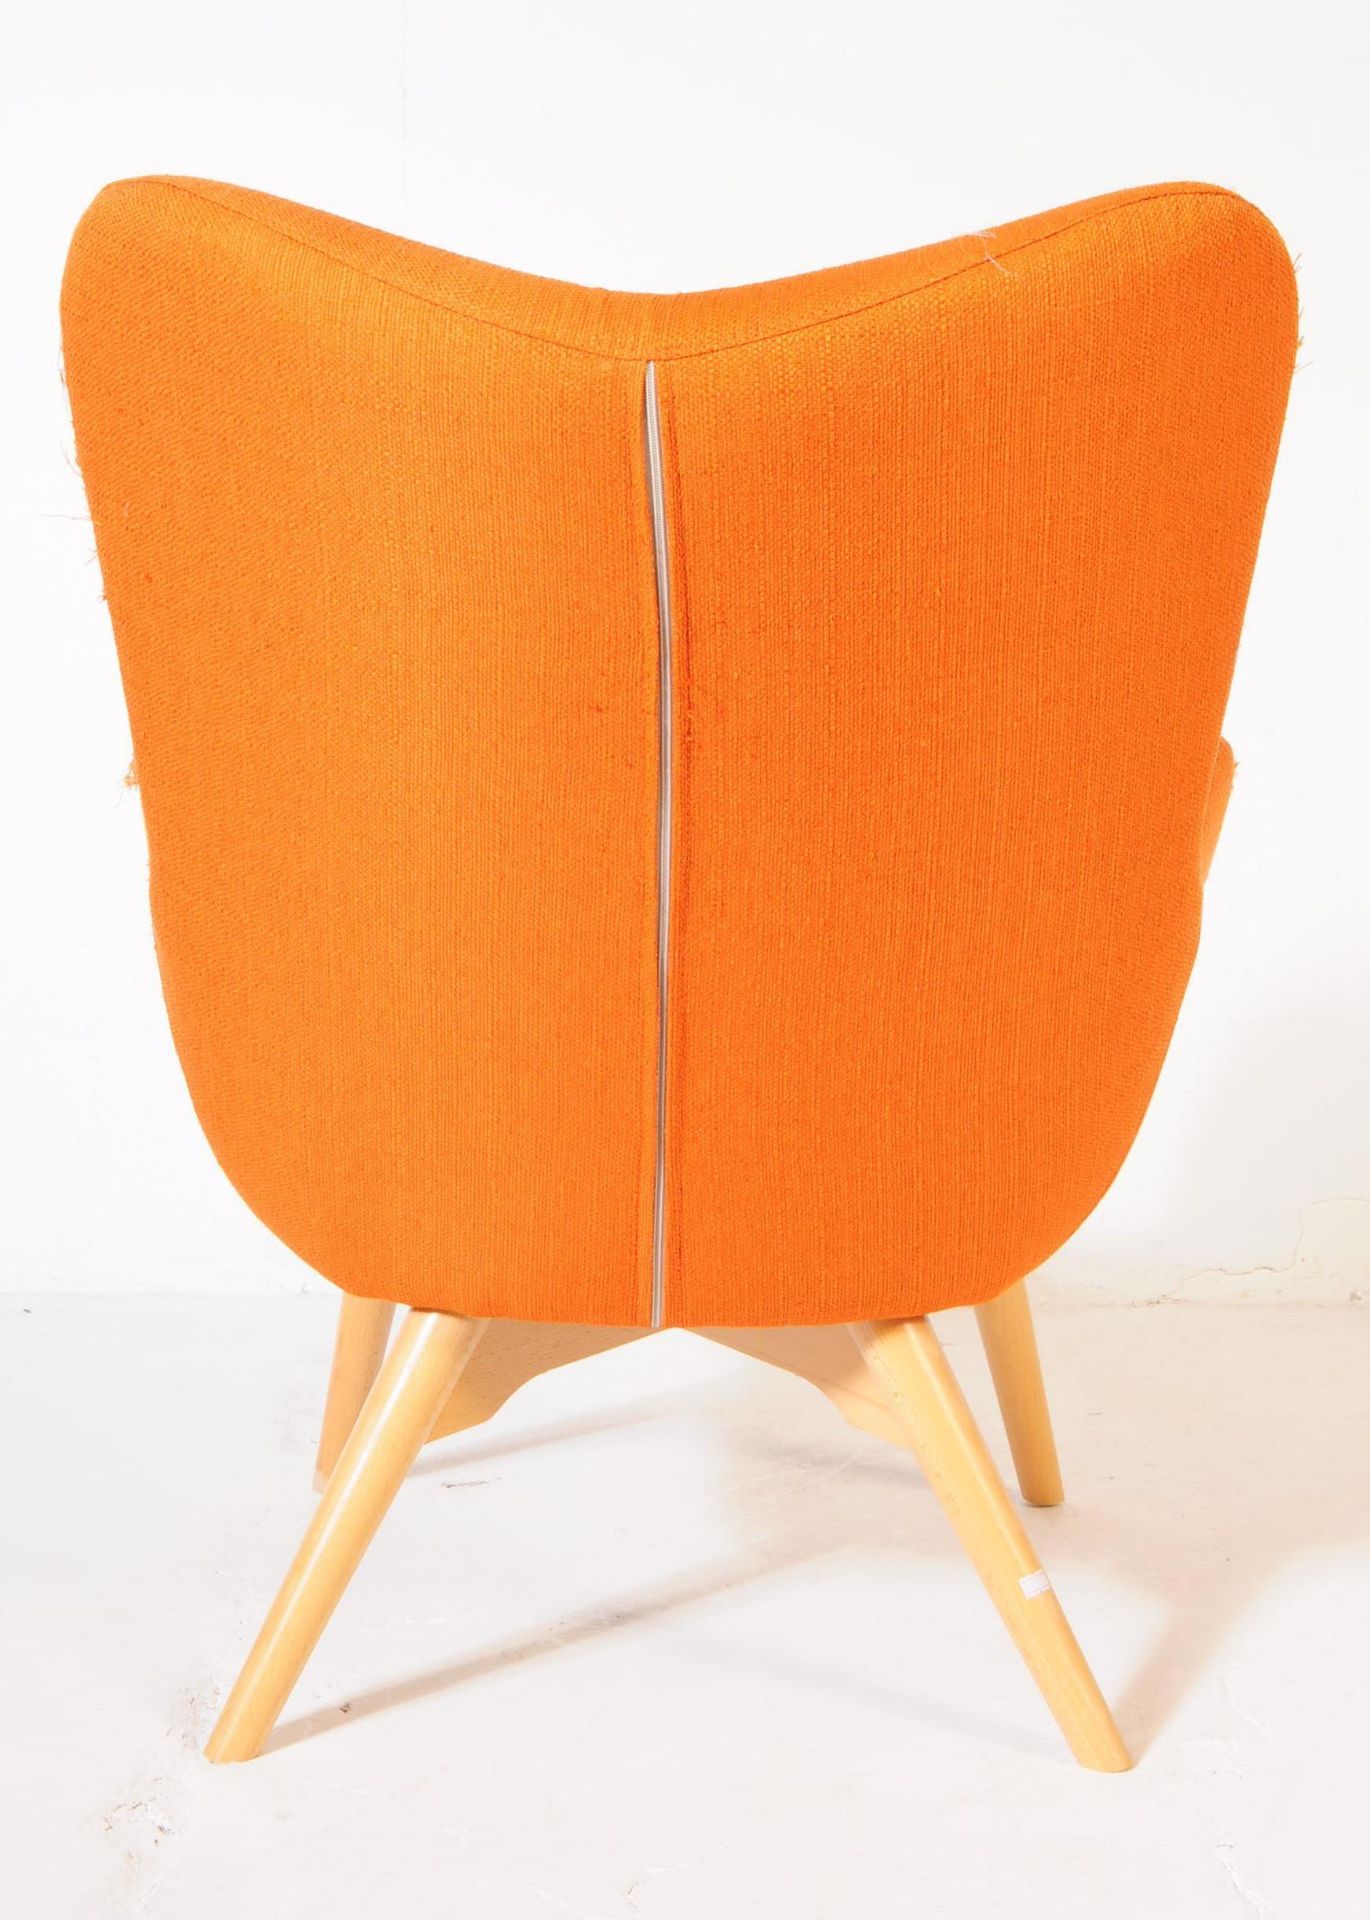 ERCOL MANNER - MID CENTURY ORANGE WINGBACK ARMCHAIR - Image 4 of 4